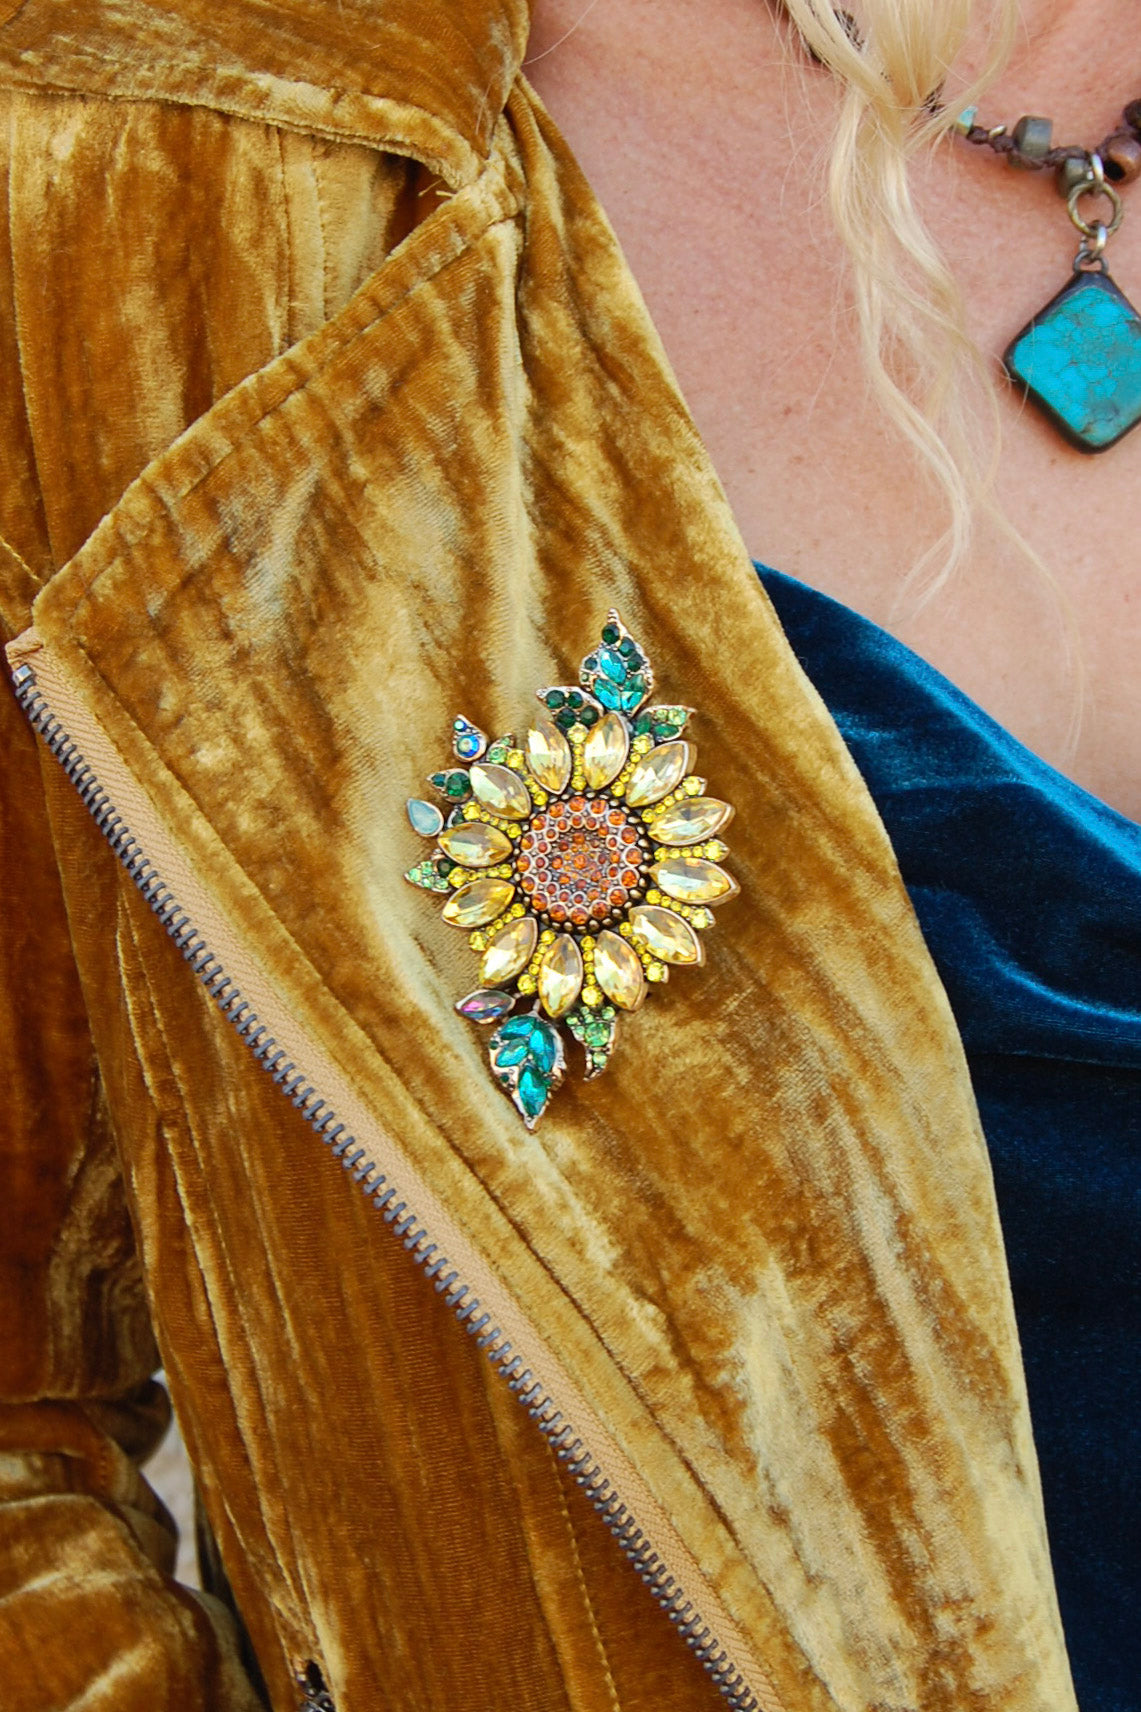 Load image into Gallery viewer, The Sunflower Bedazzled Brooch - SpiritedBoutiques Boho Hippie Boutique Style Brooch, Metal Gallery
